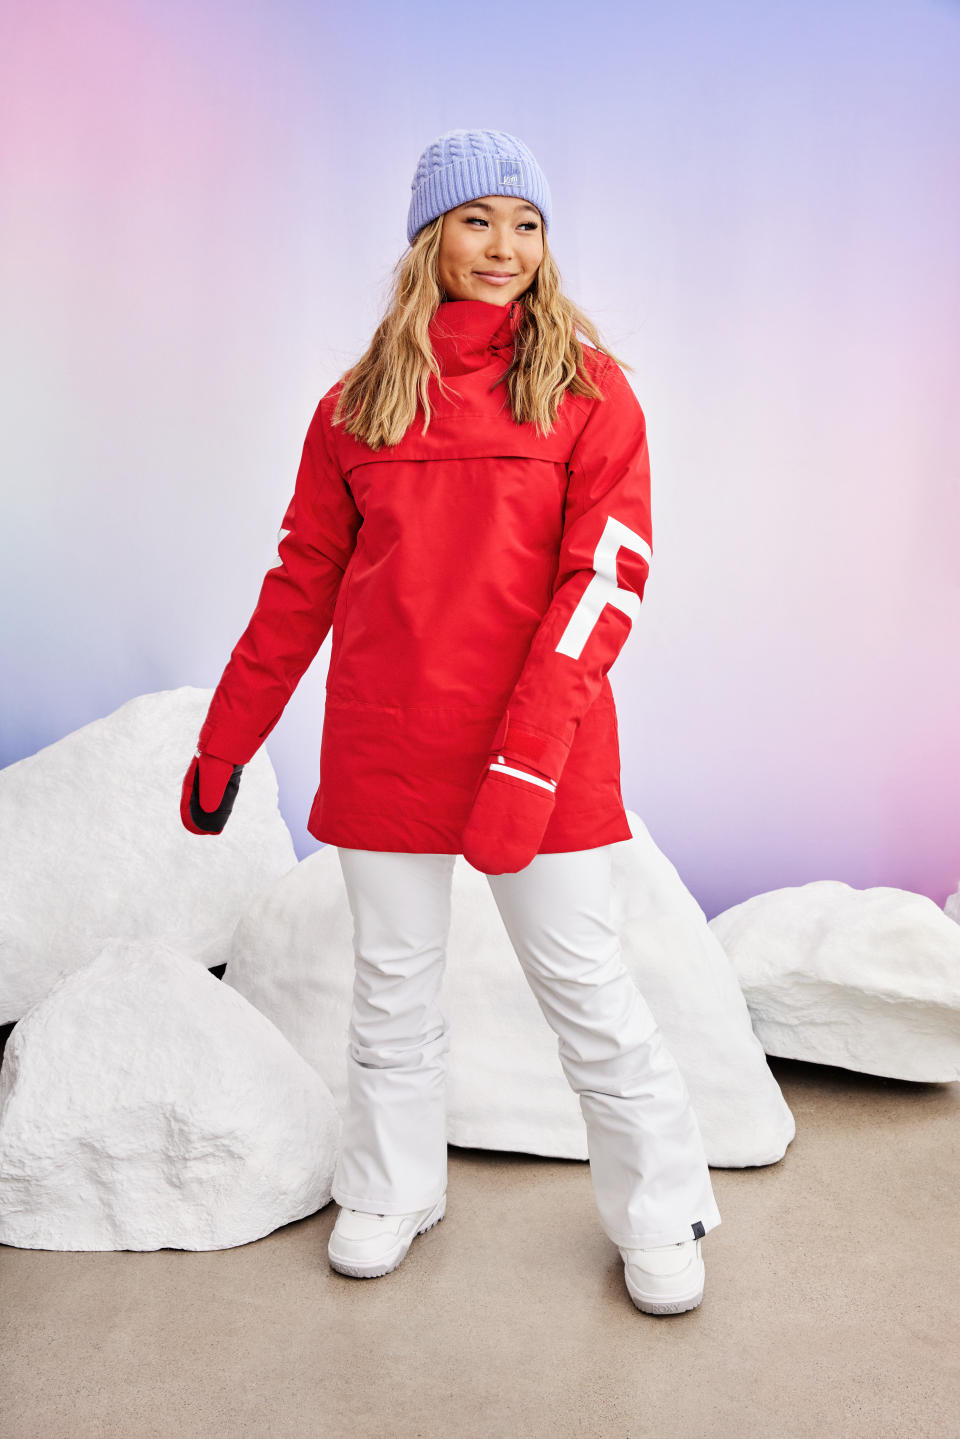 Chloe Kim in the red jacket from the Chloe Kim Signature Collection, a collaboration with Roxy. Courtesy Photo